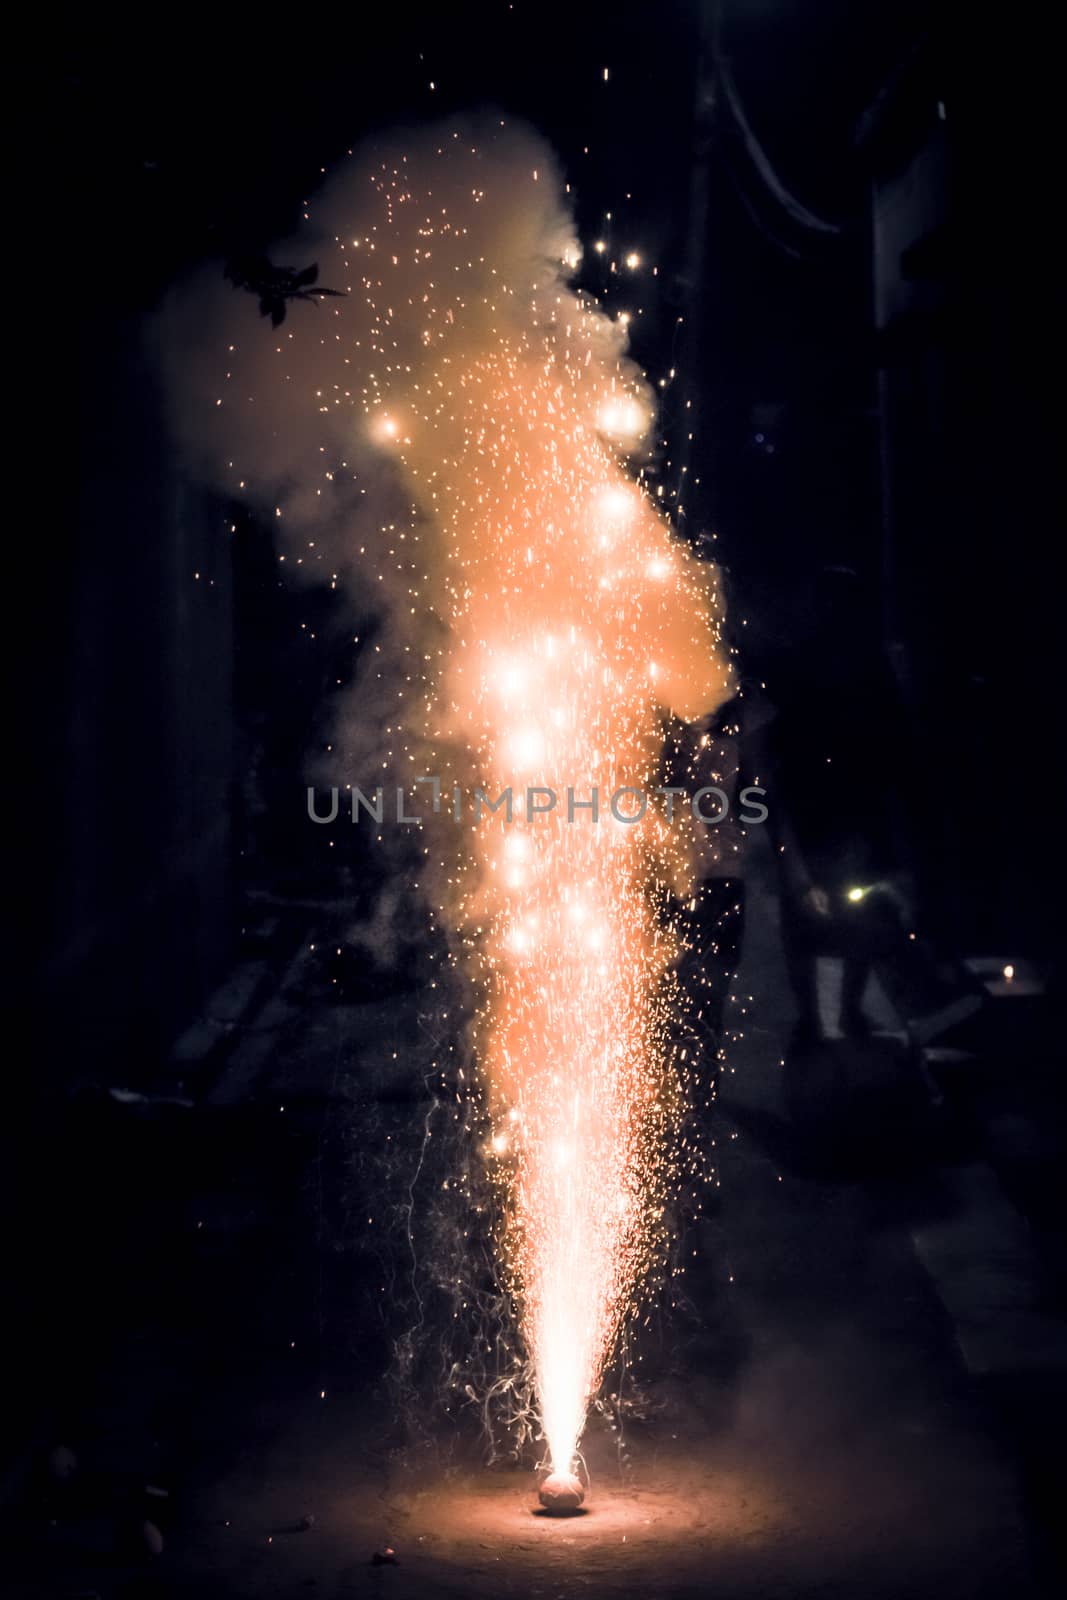 Bright and colorful fireworks showing display at night in City Street during Diwali festival celebration in Kolkata India. Close-up. Copy space room for text.